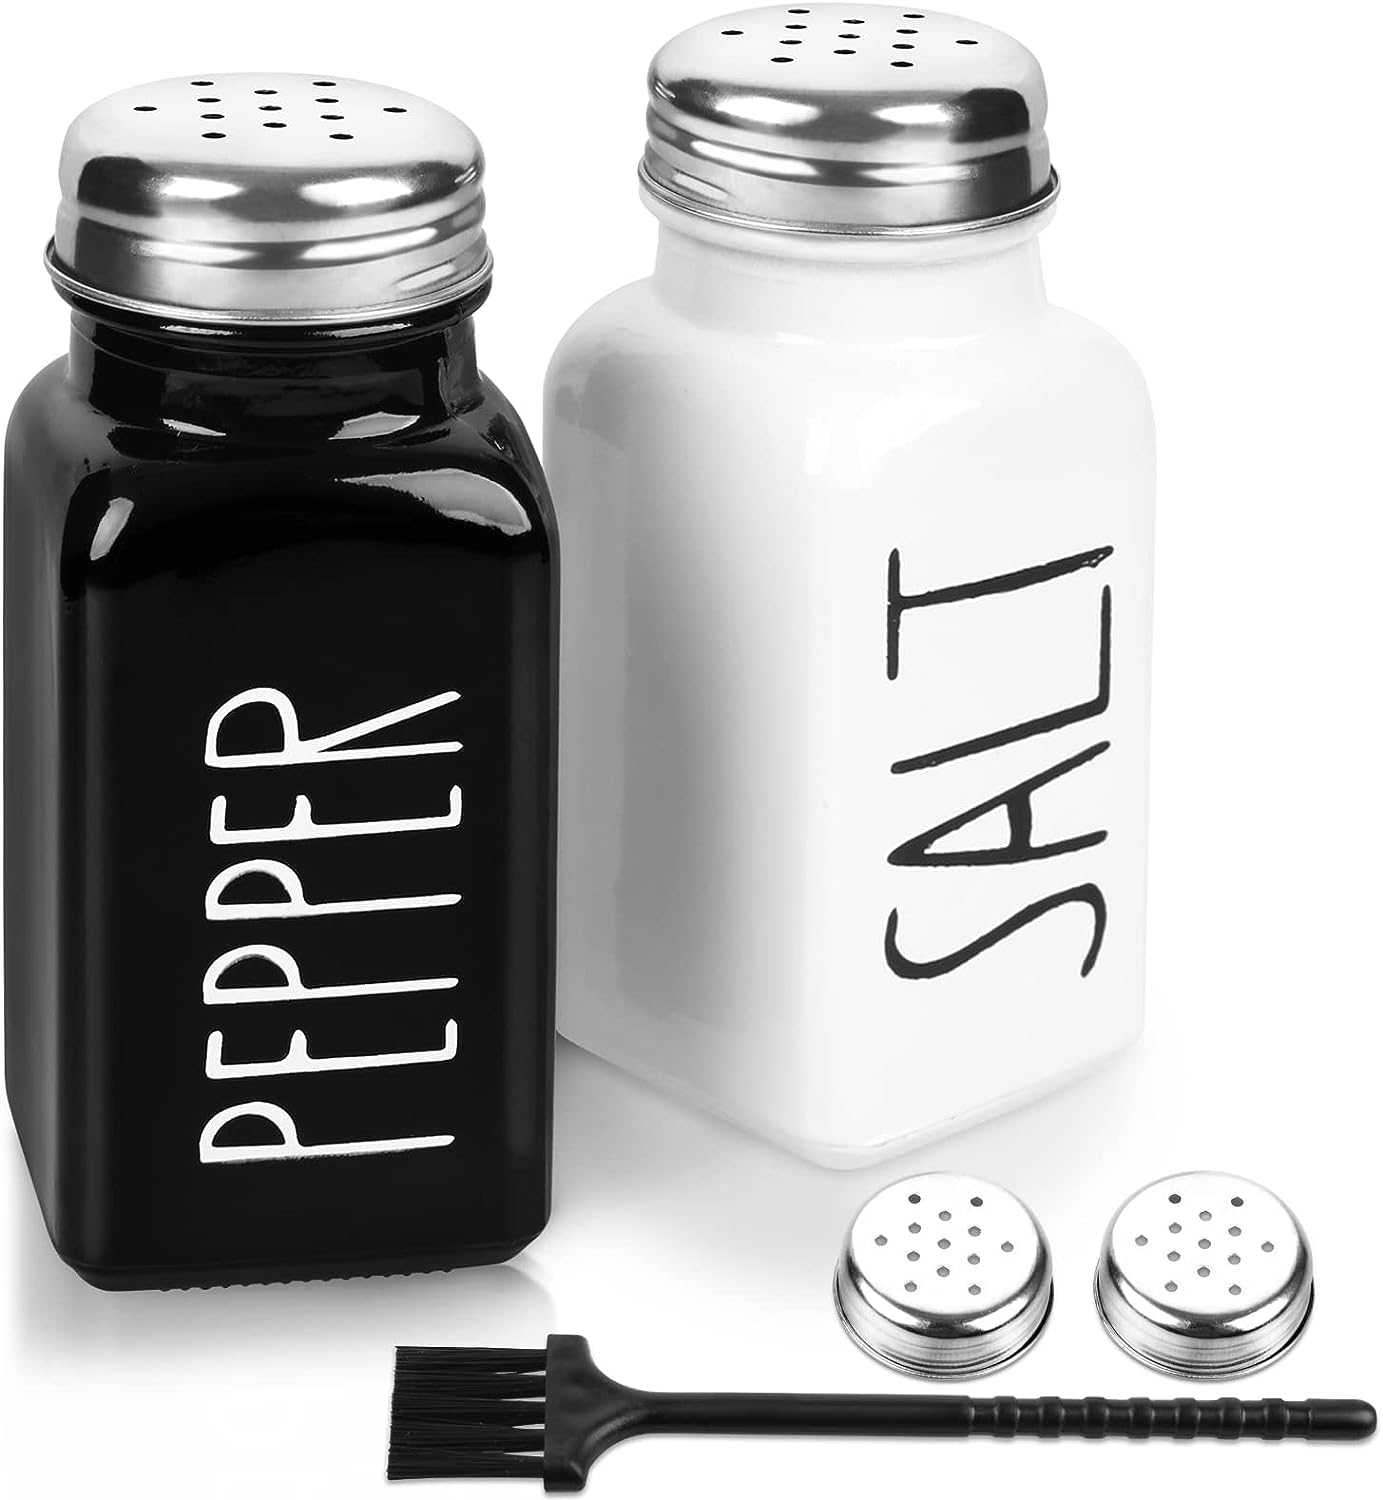 PECULA 2 Pack Salt and Pepper Shakers Set